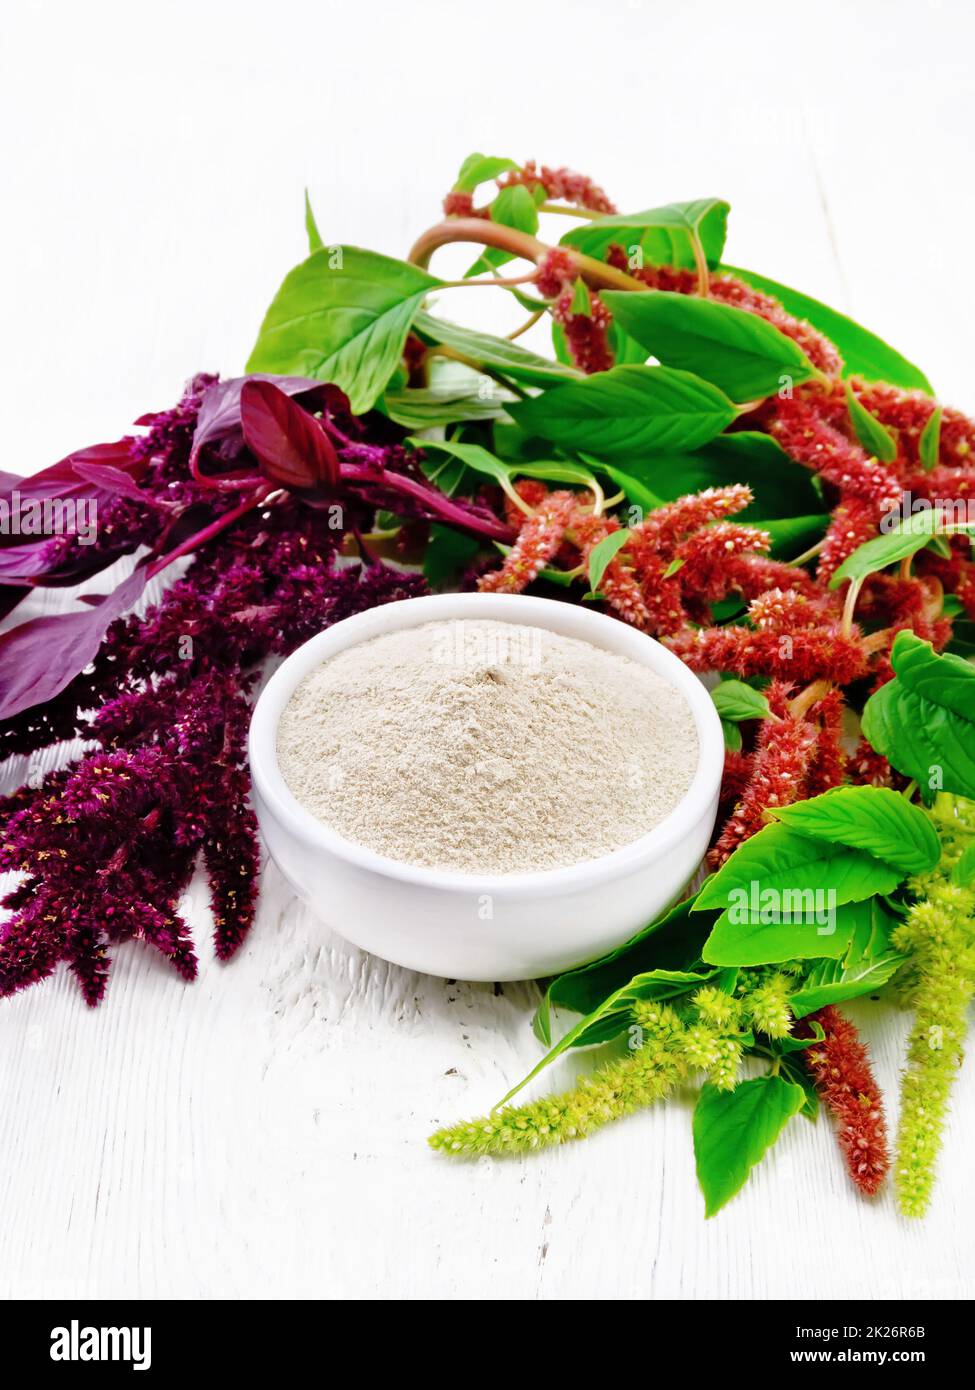 Flour amaranth in bowl on wooden board Stock Photo